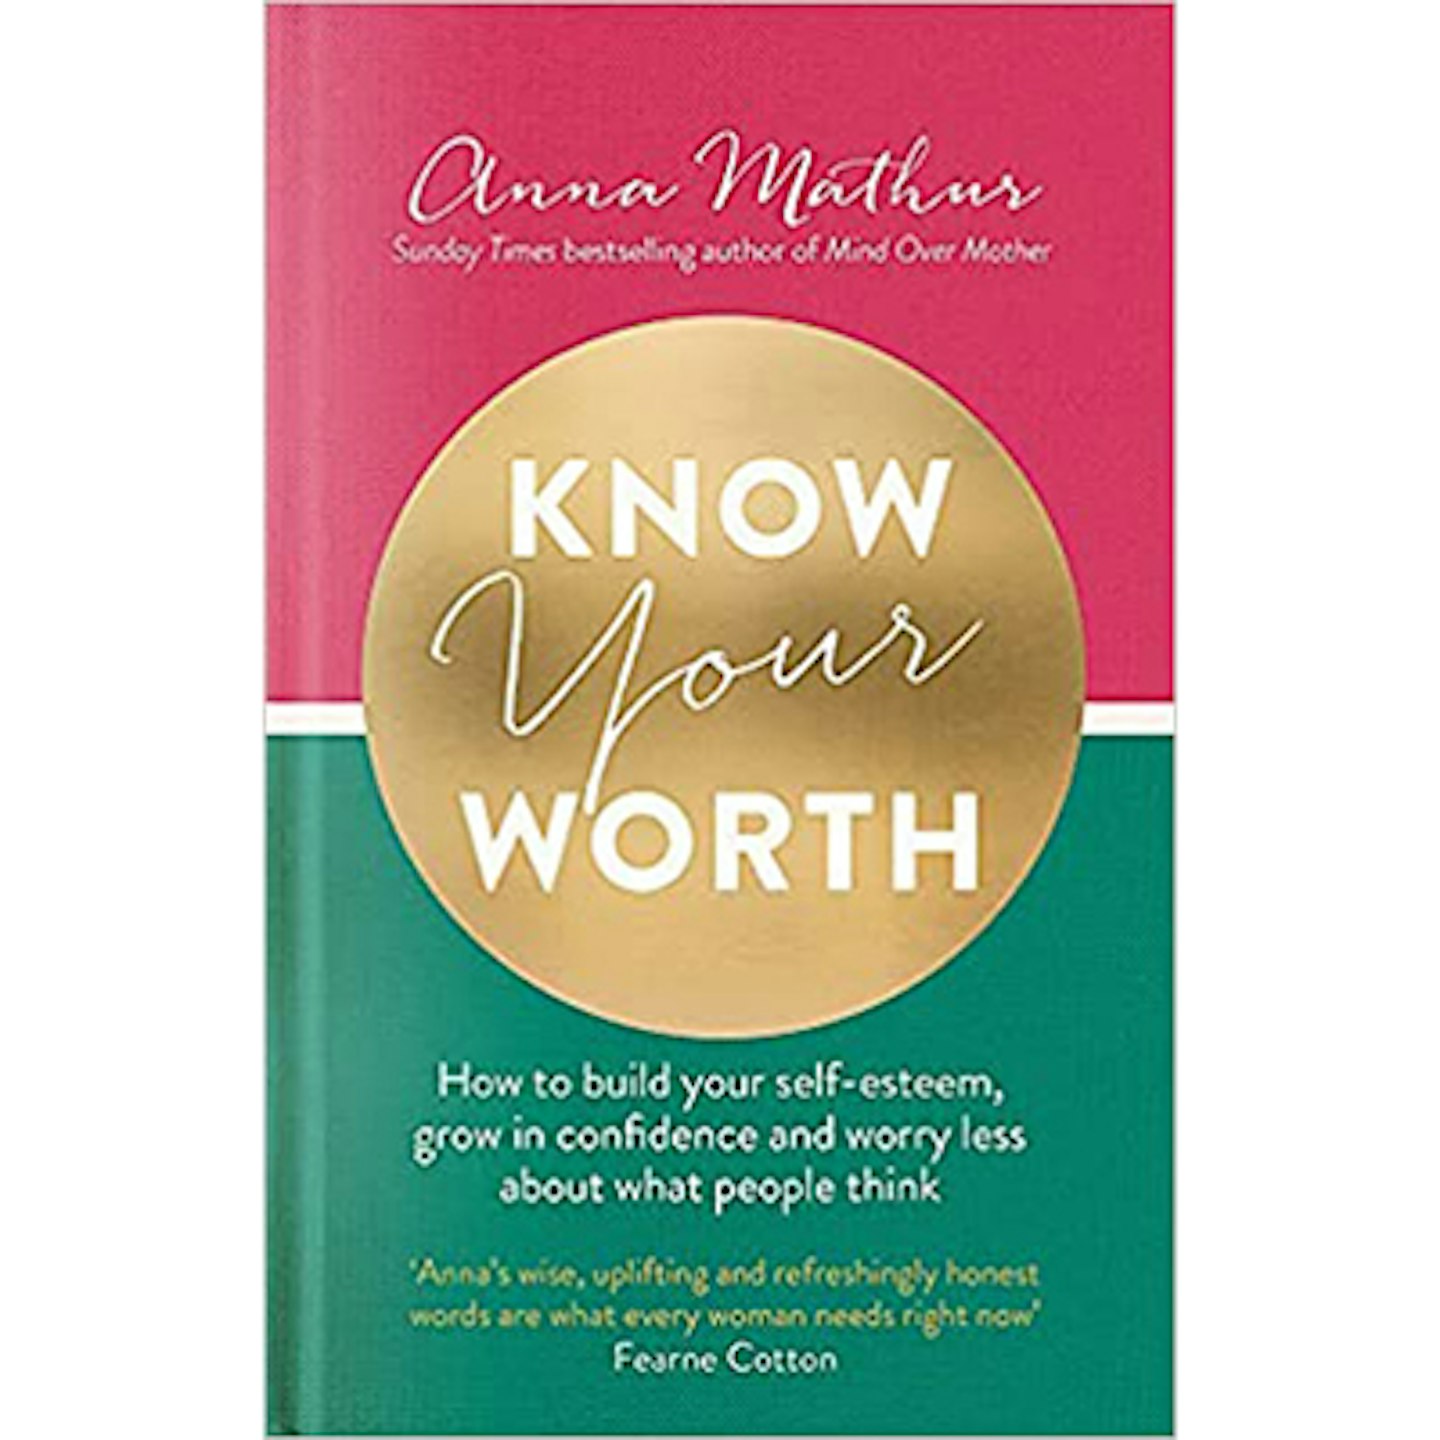 best parenting books - know your worth